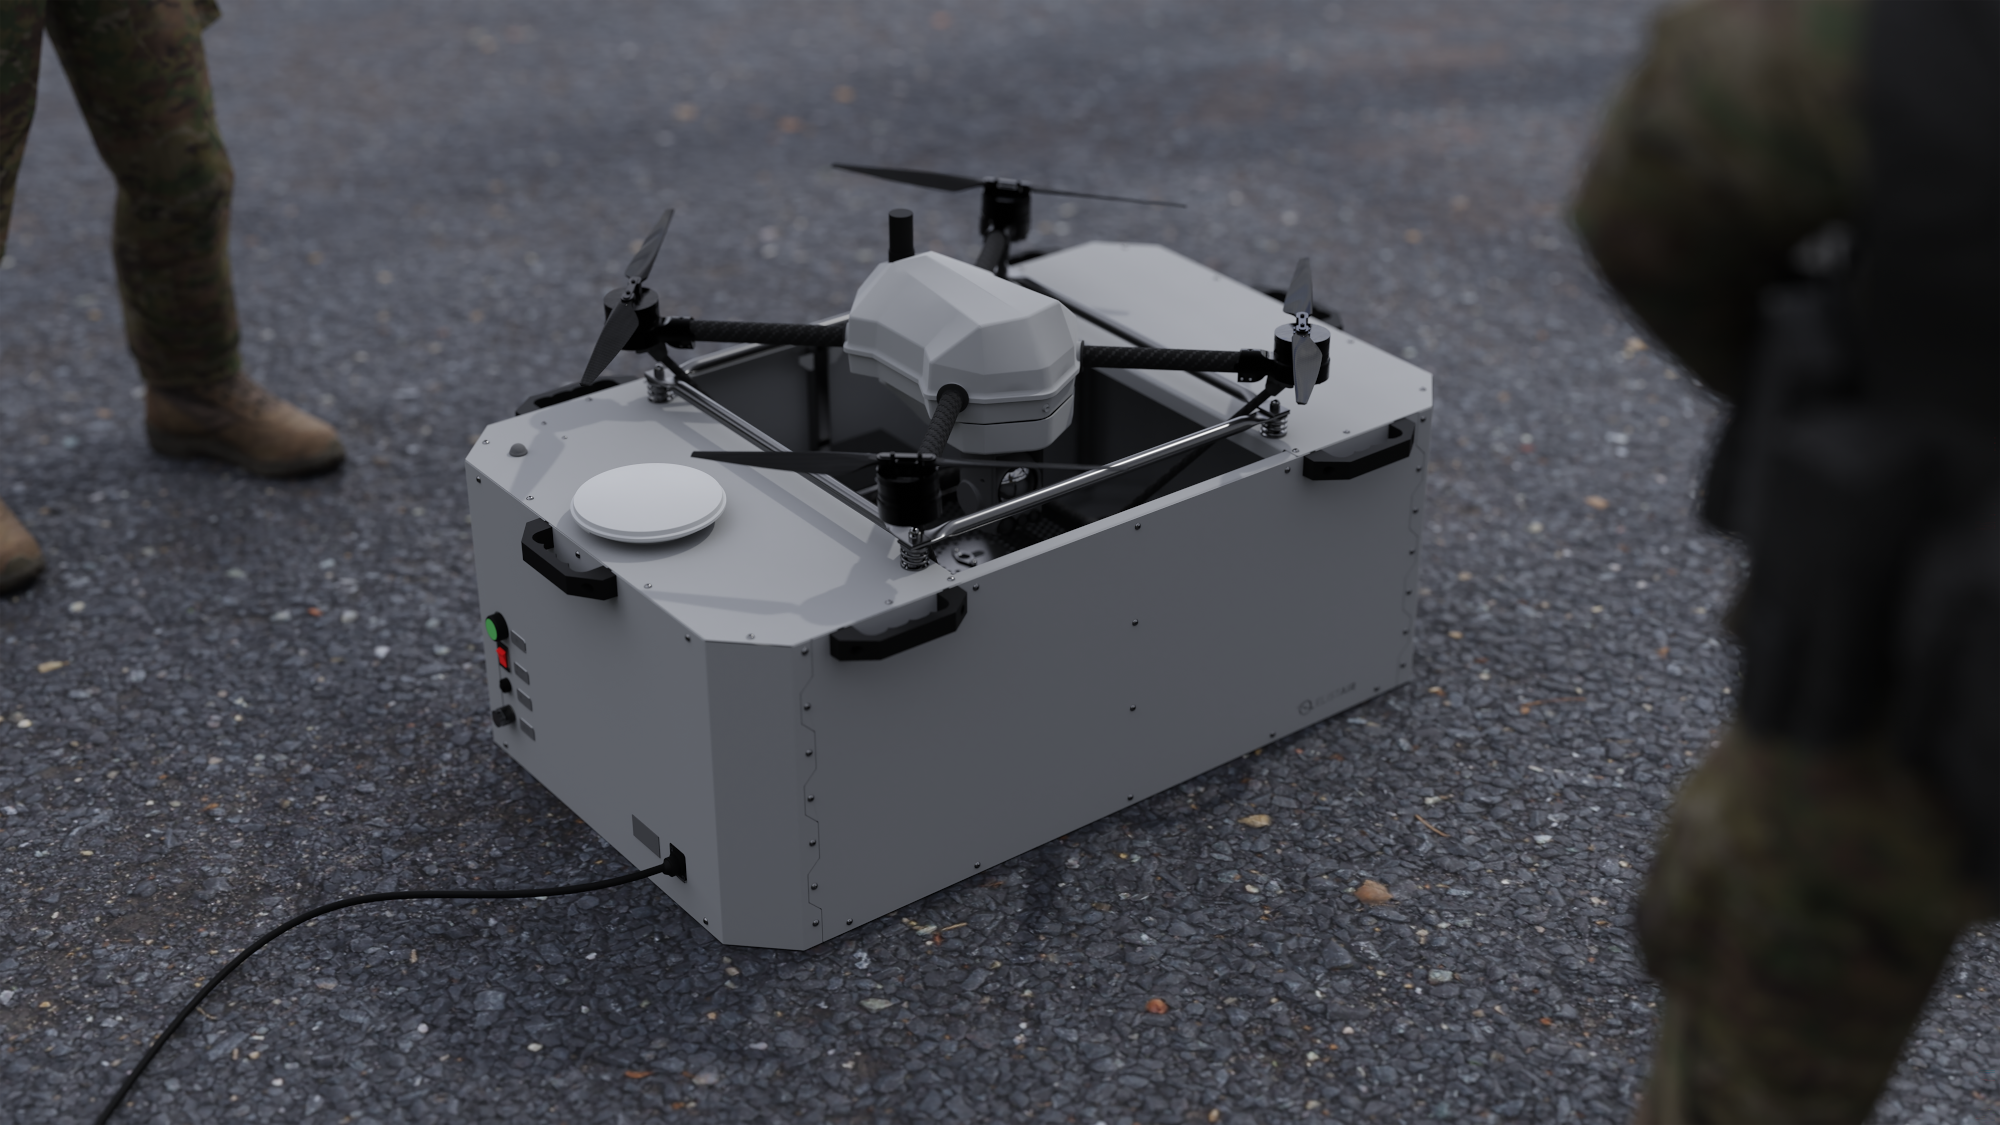 Elistair Unveils Khronos Tethered Drone for Tactical ISR Missions